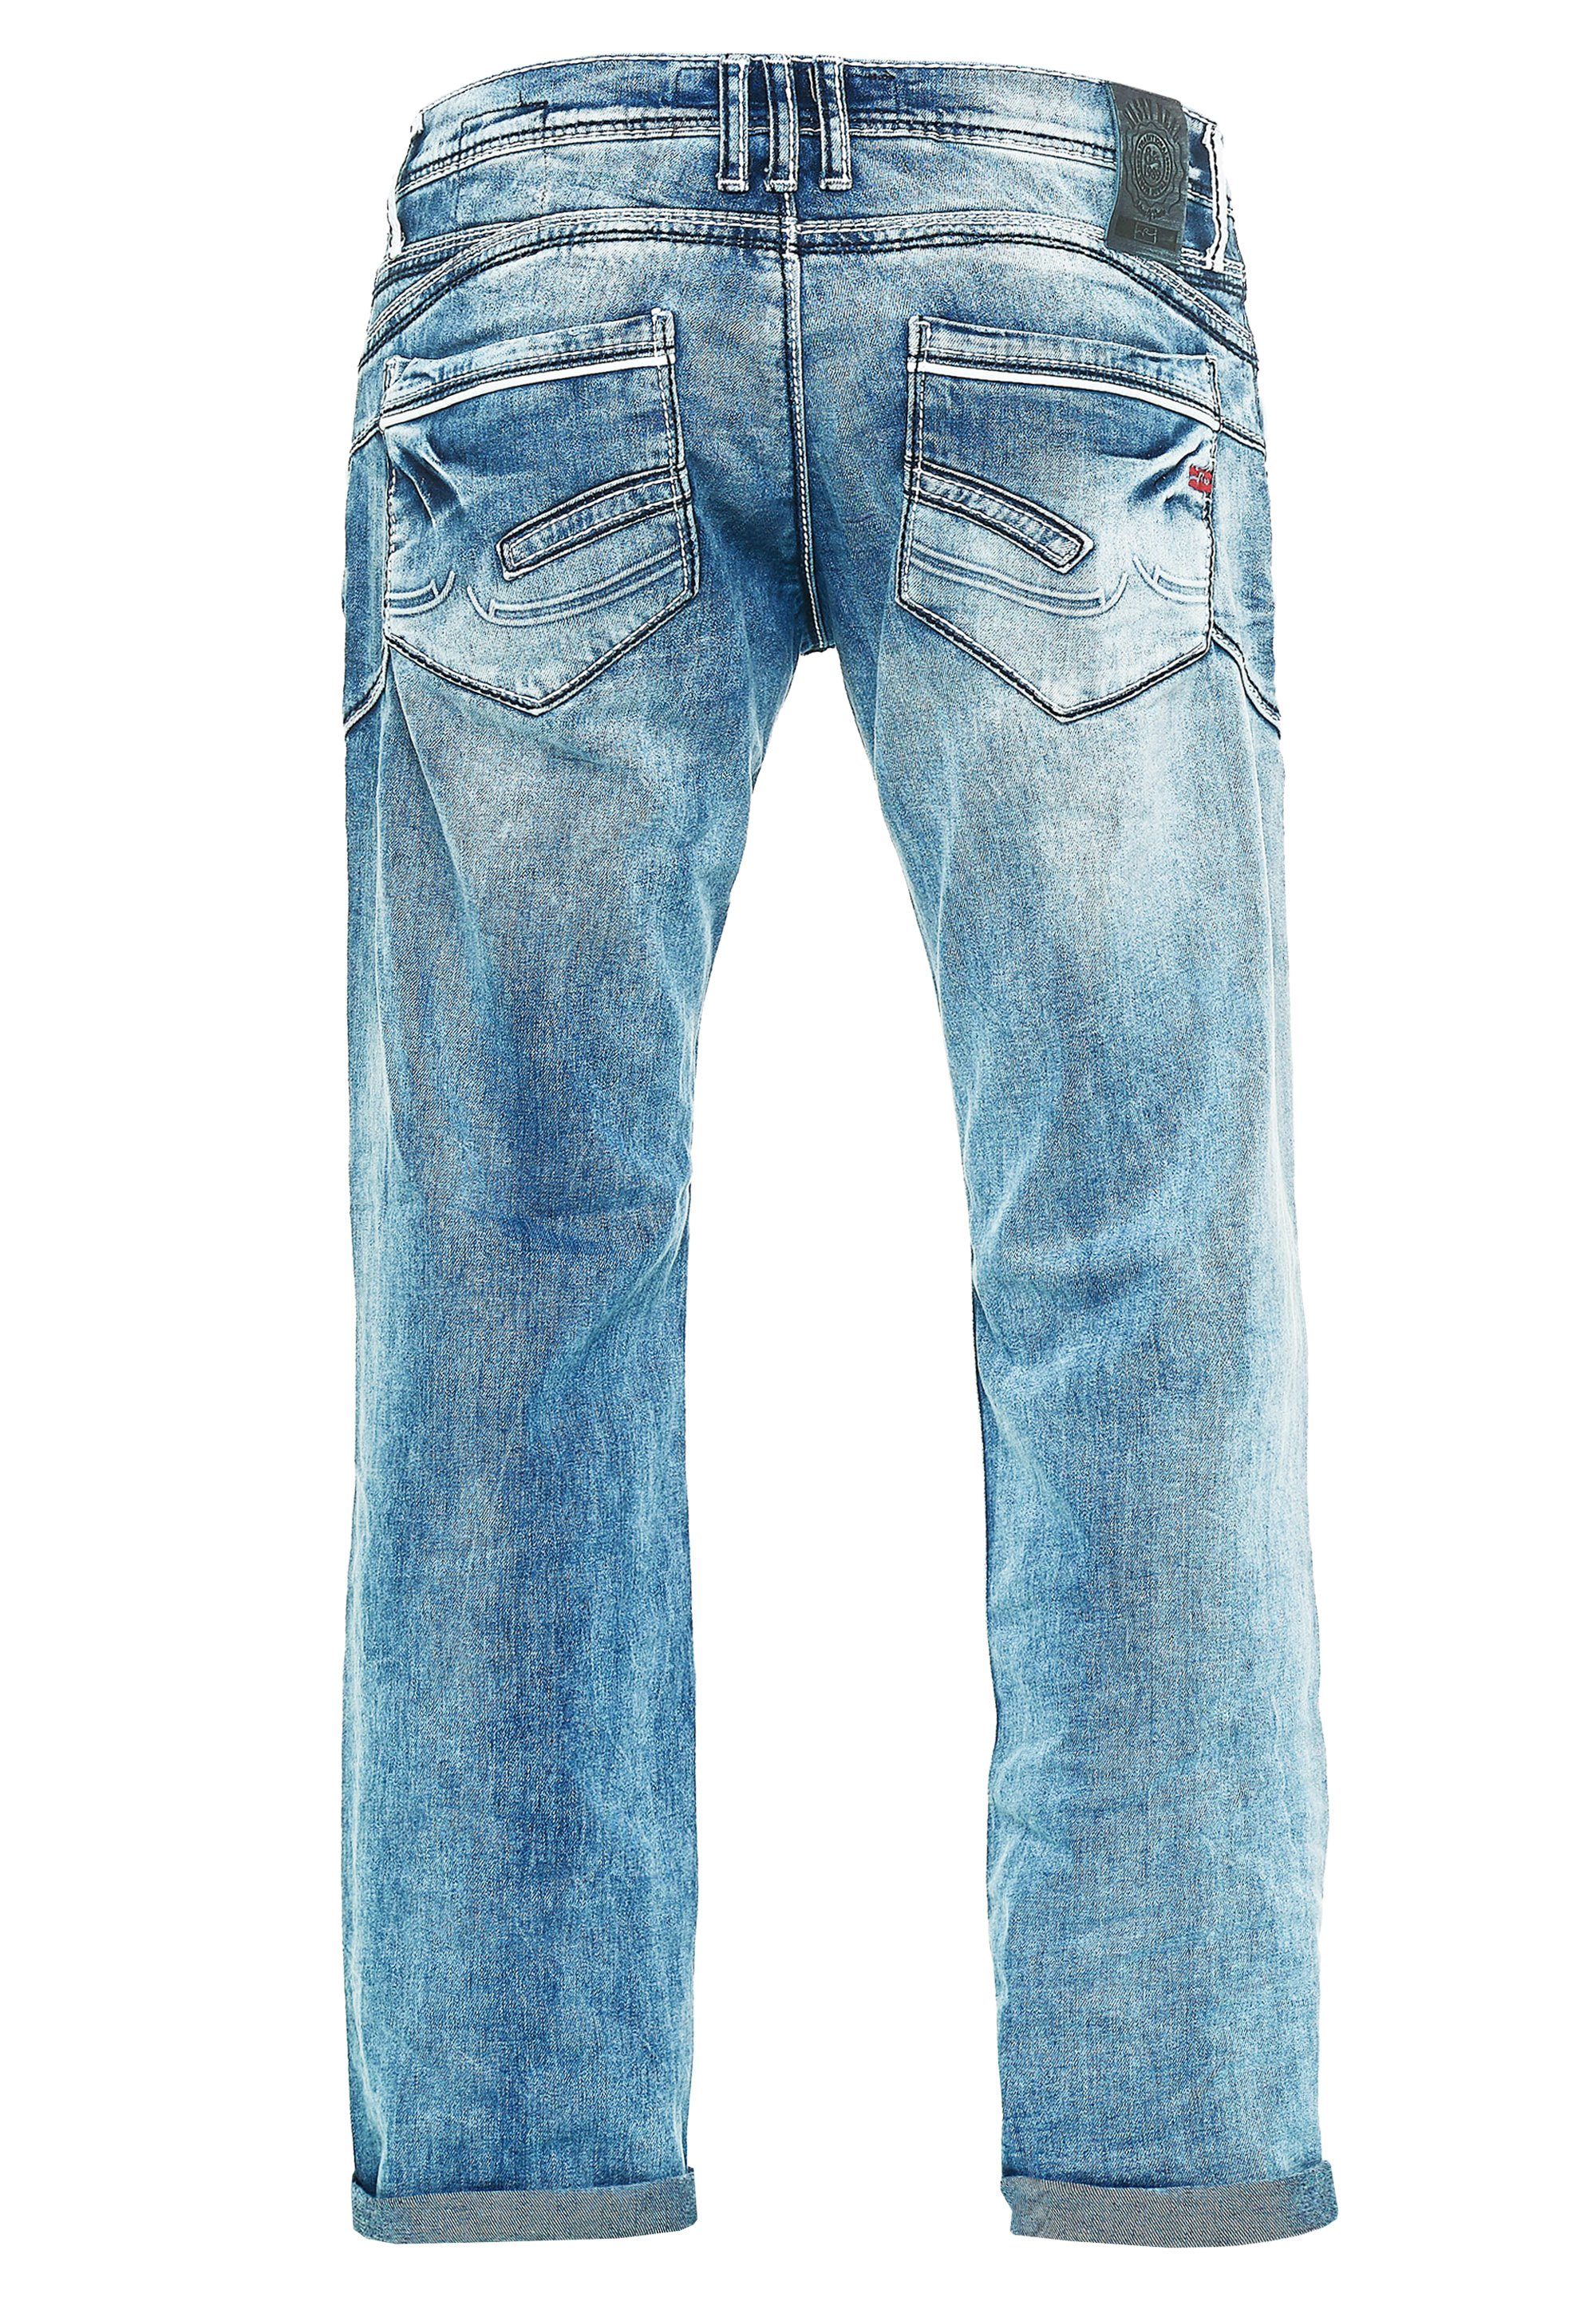 Bequeme Waschung cooler Jeans mit Rusty Neal